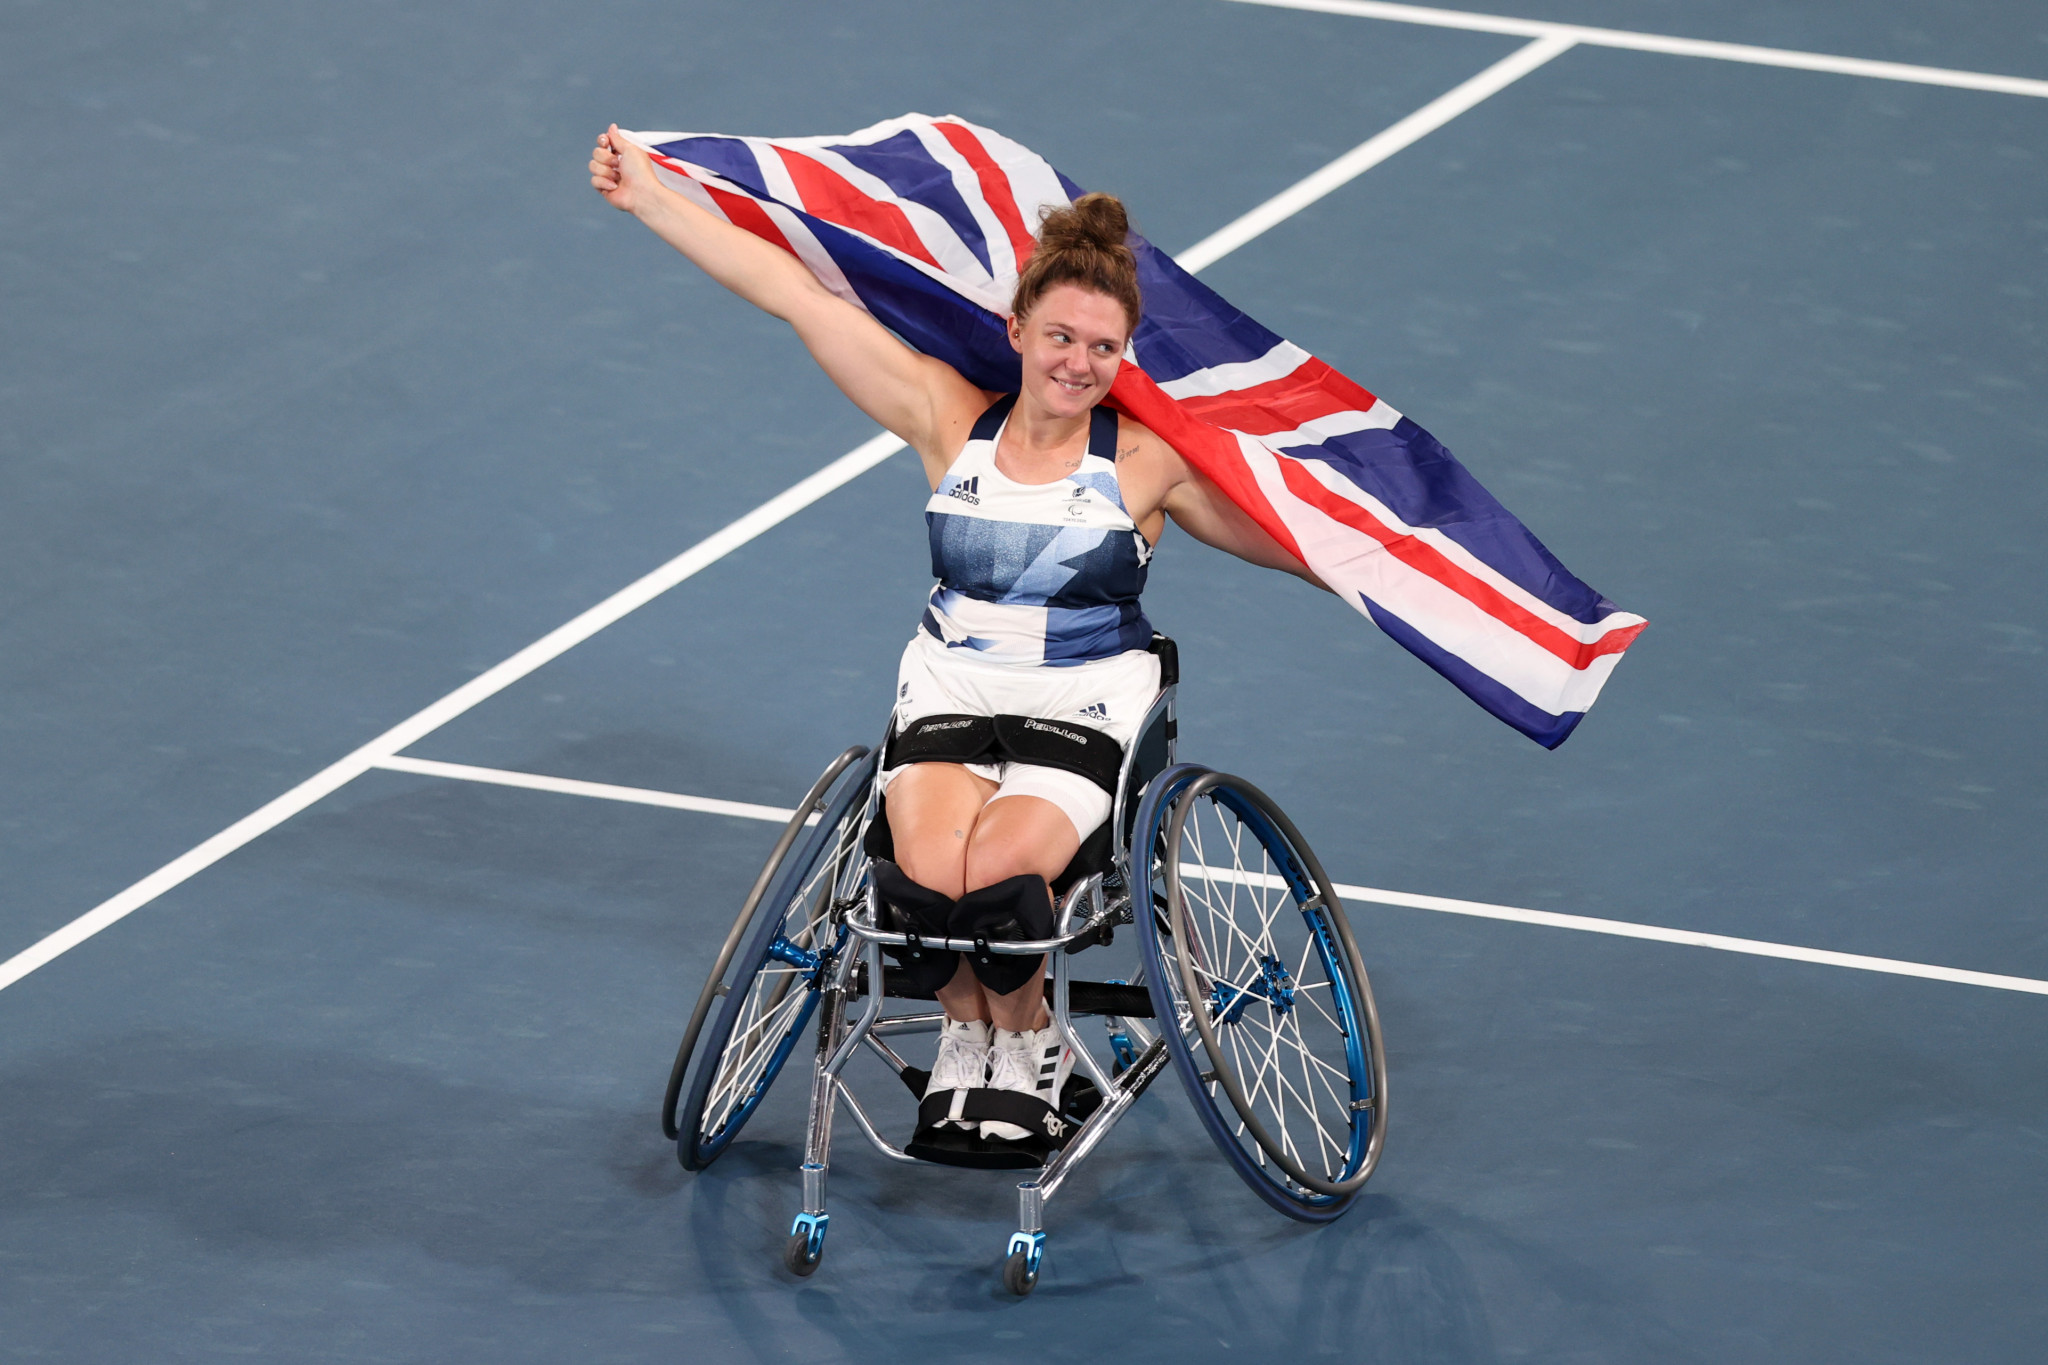 Wheelchair tennis player Jordanne Whiley is from Halesowen and has won several Grand Slams ©Getty Images